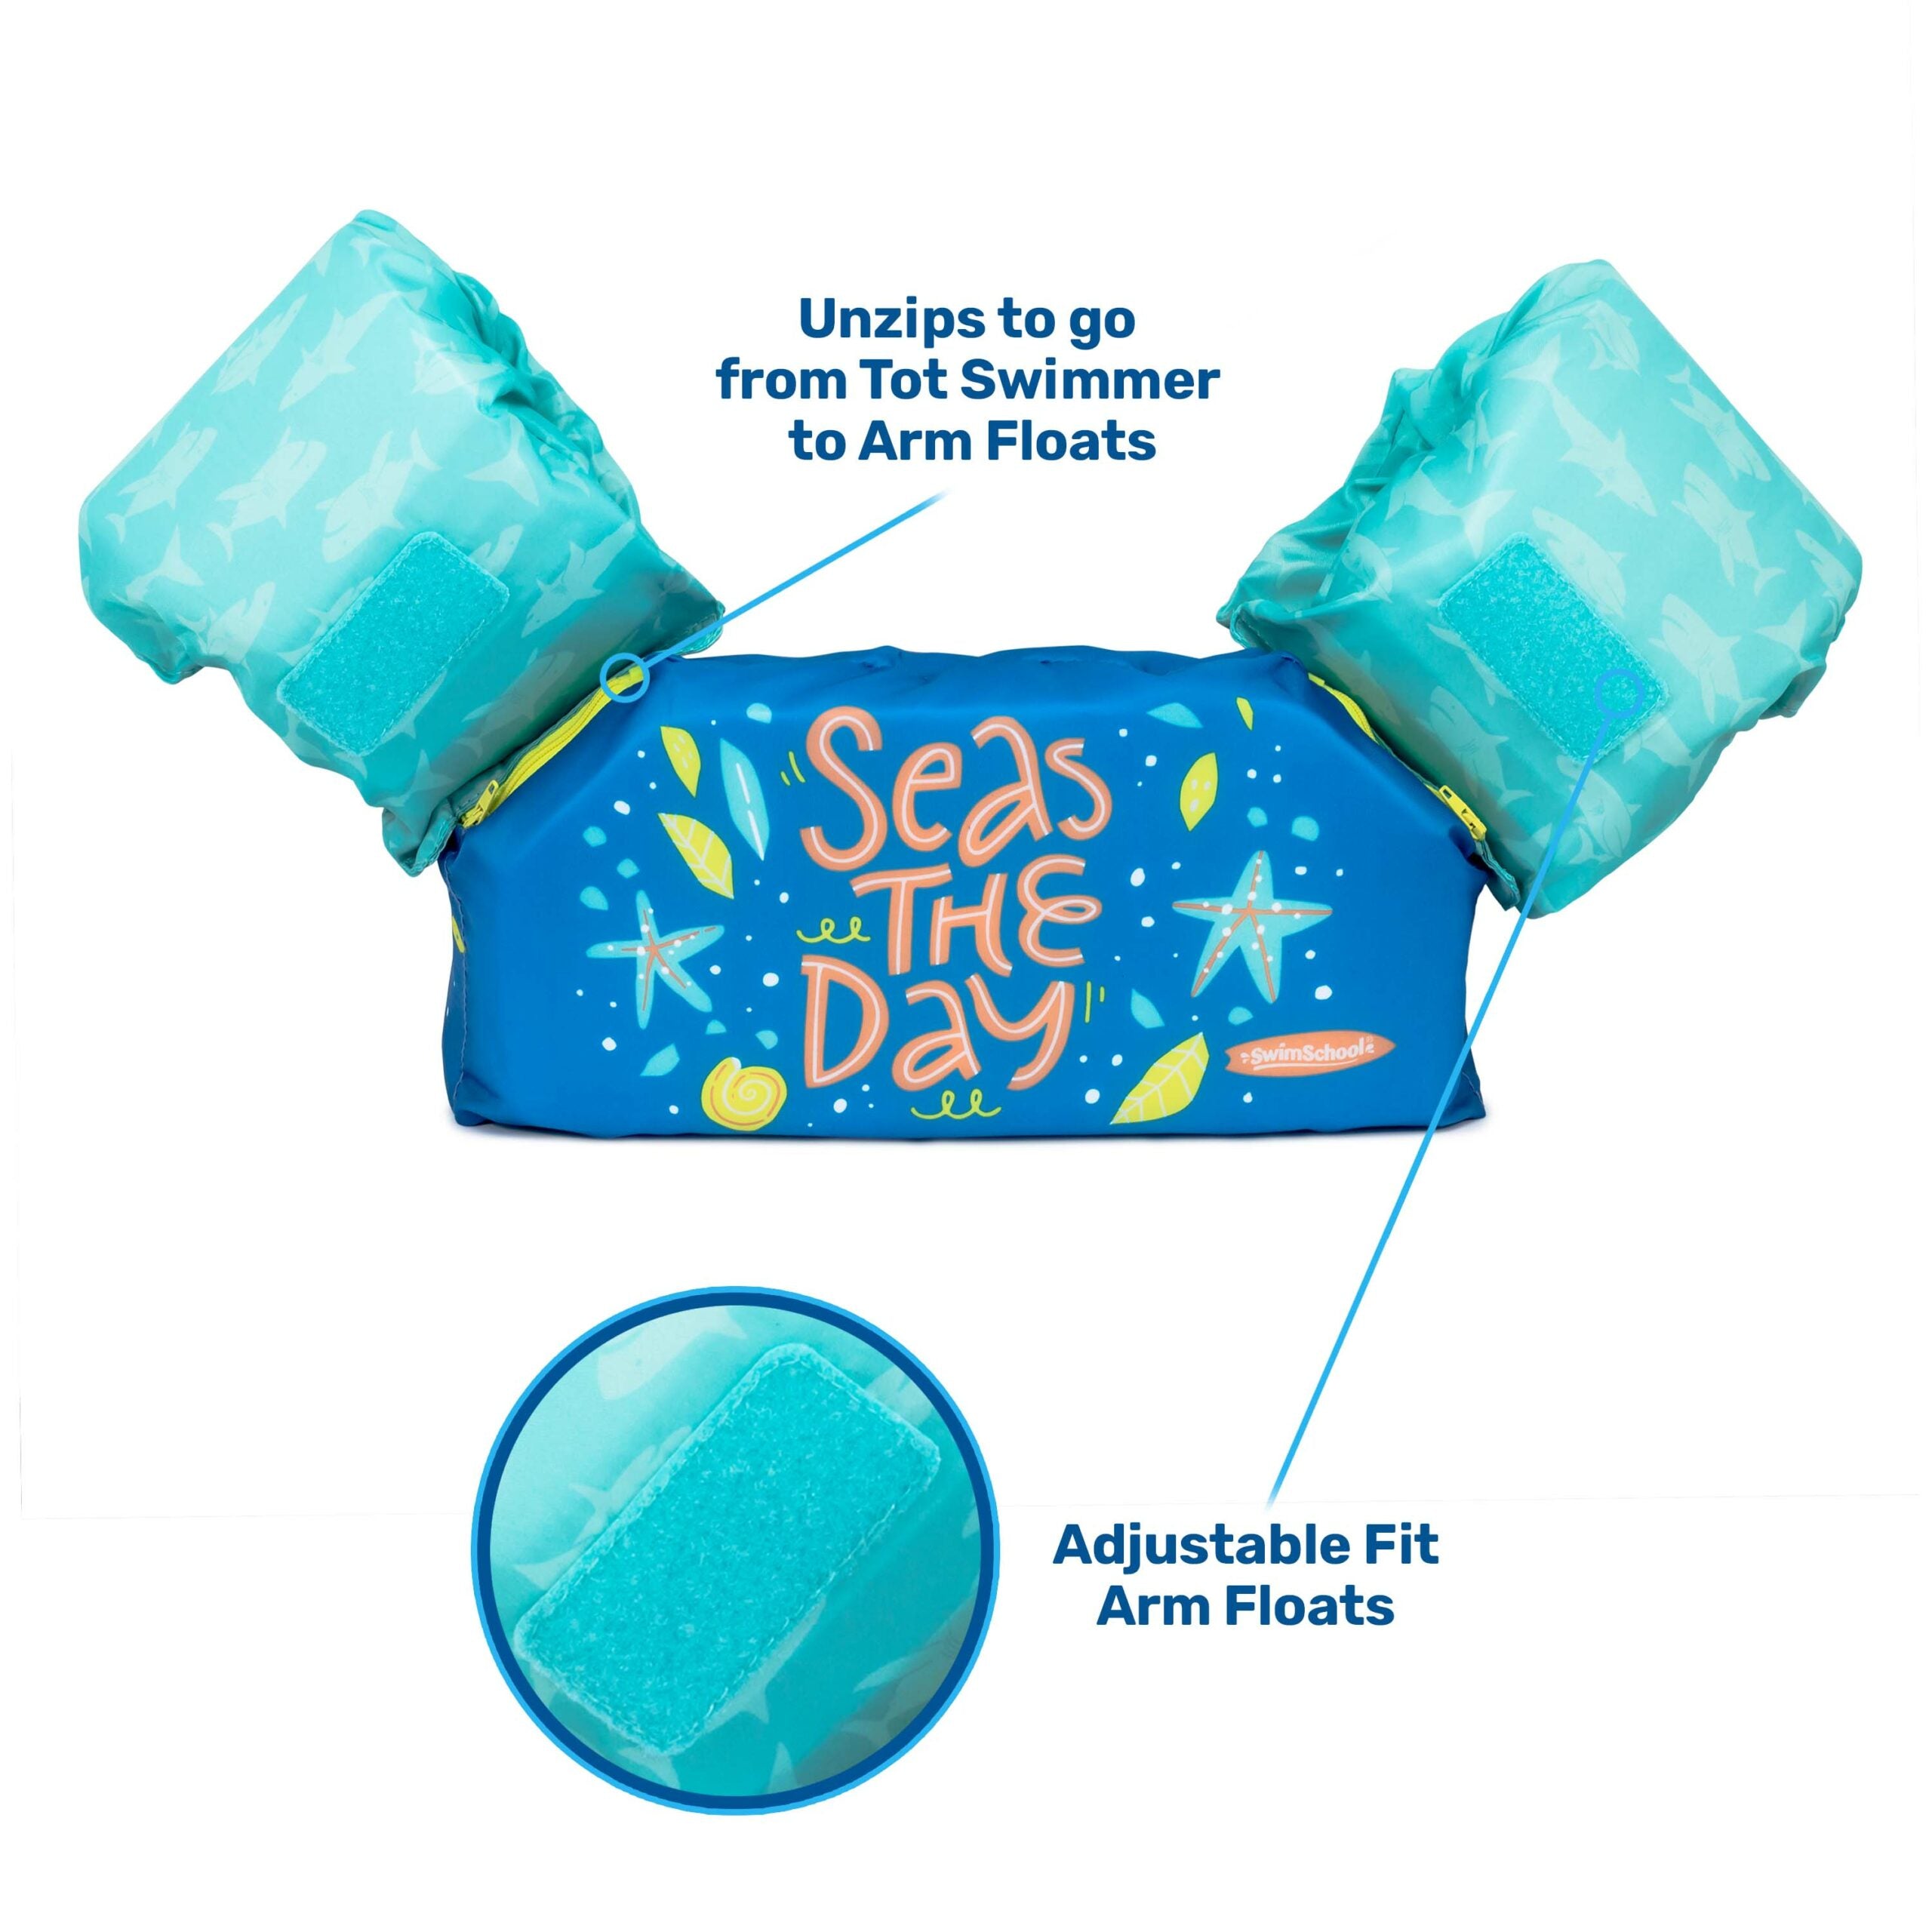 Ultra-Fit Tot Swimmer Swim Trainer for Kids 2-in-1